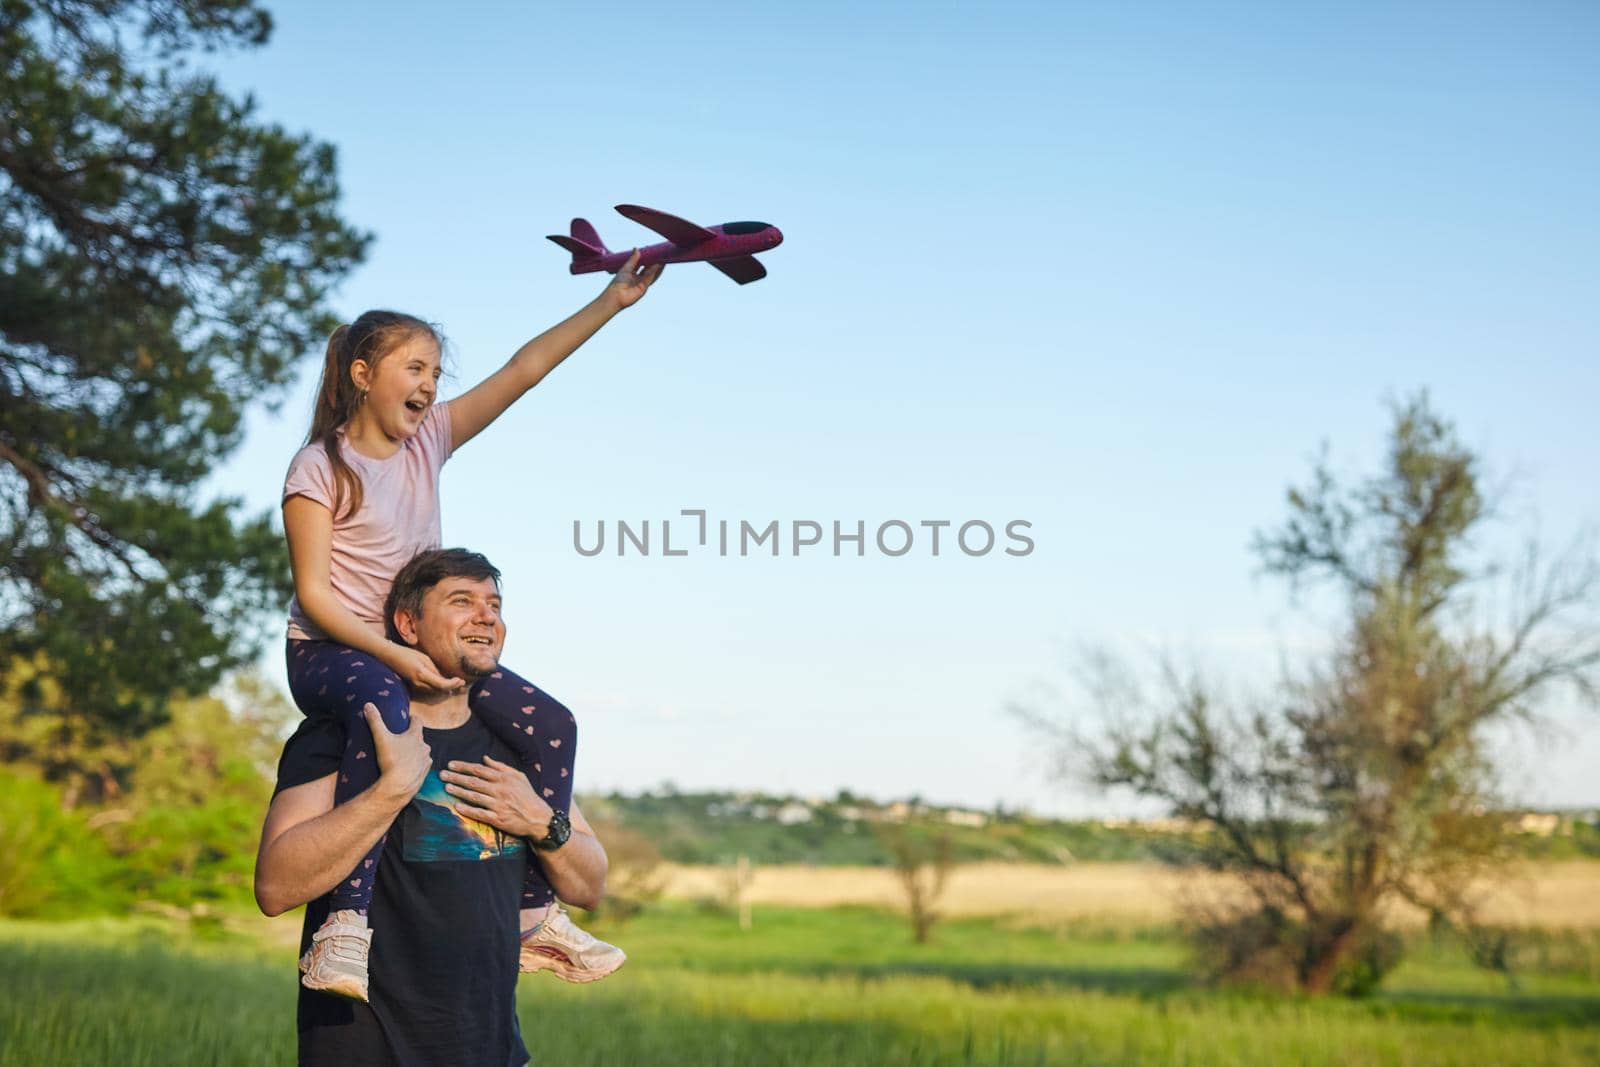 Cute girl riding on father's shoulder and playing with toy airplane against sky in summer forest